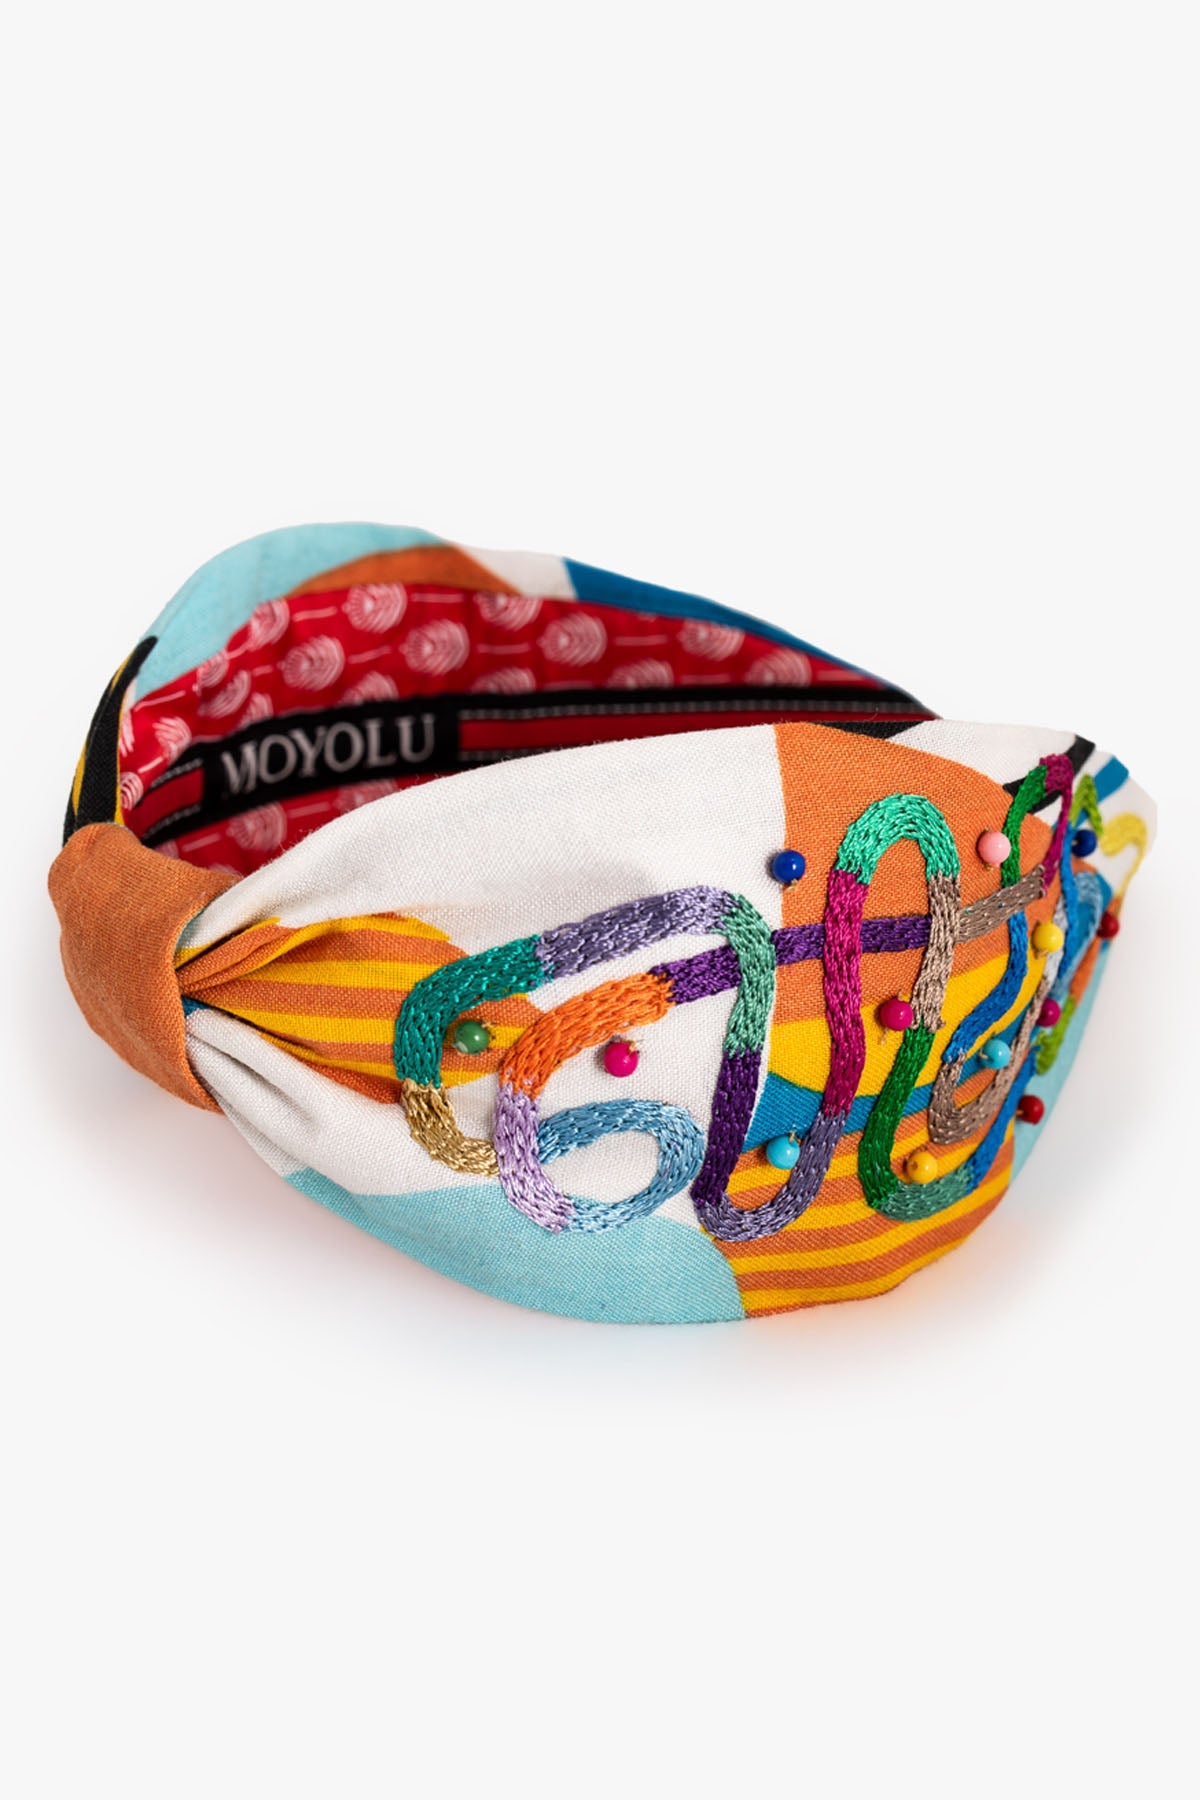 Moyolu Multicolor Embroidered Headband Accessories online at ScrollnShops